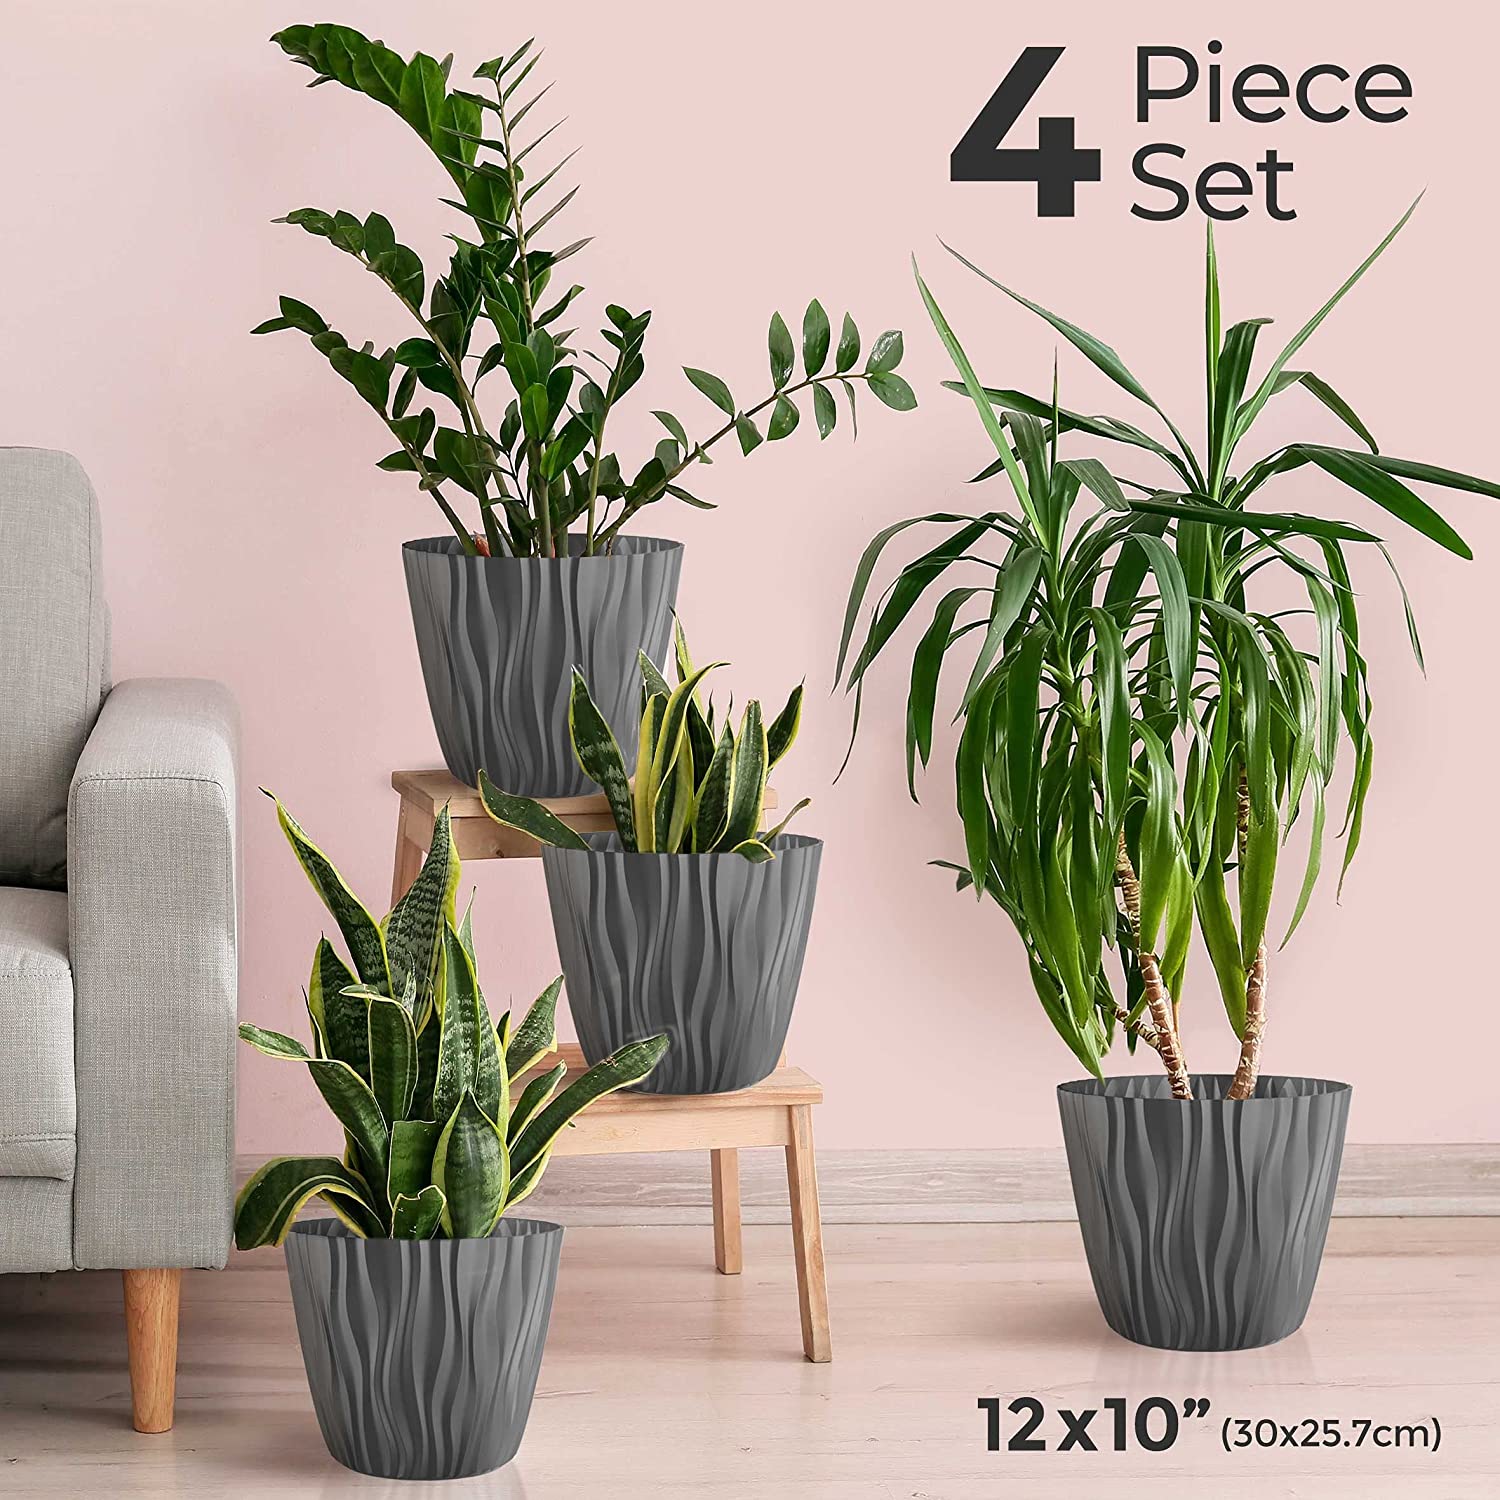 mullerhome_Decorative-Plant-and-Flower-Pots – Extra Large 4 Piece-Gray-Set-2